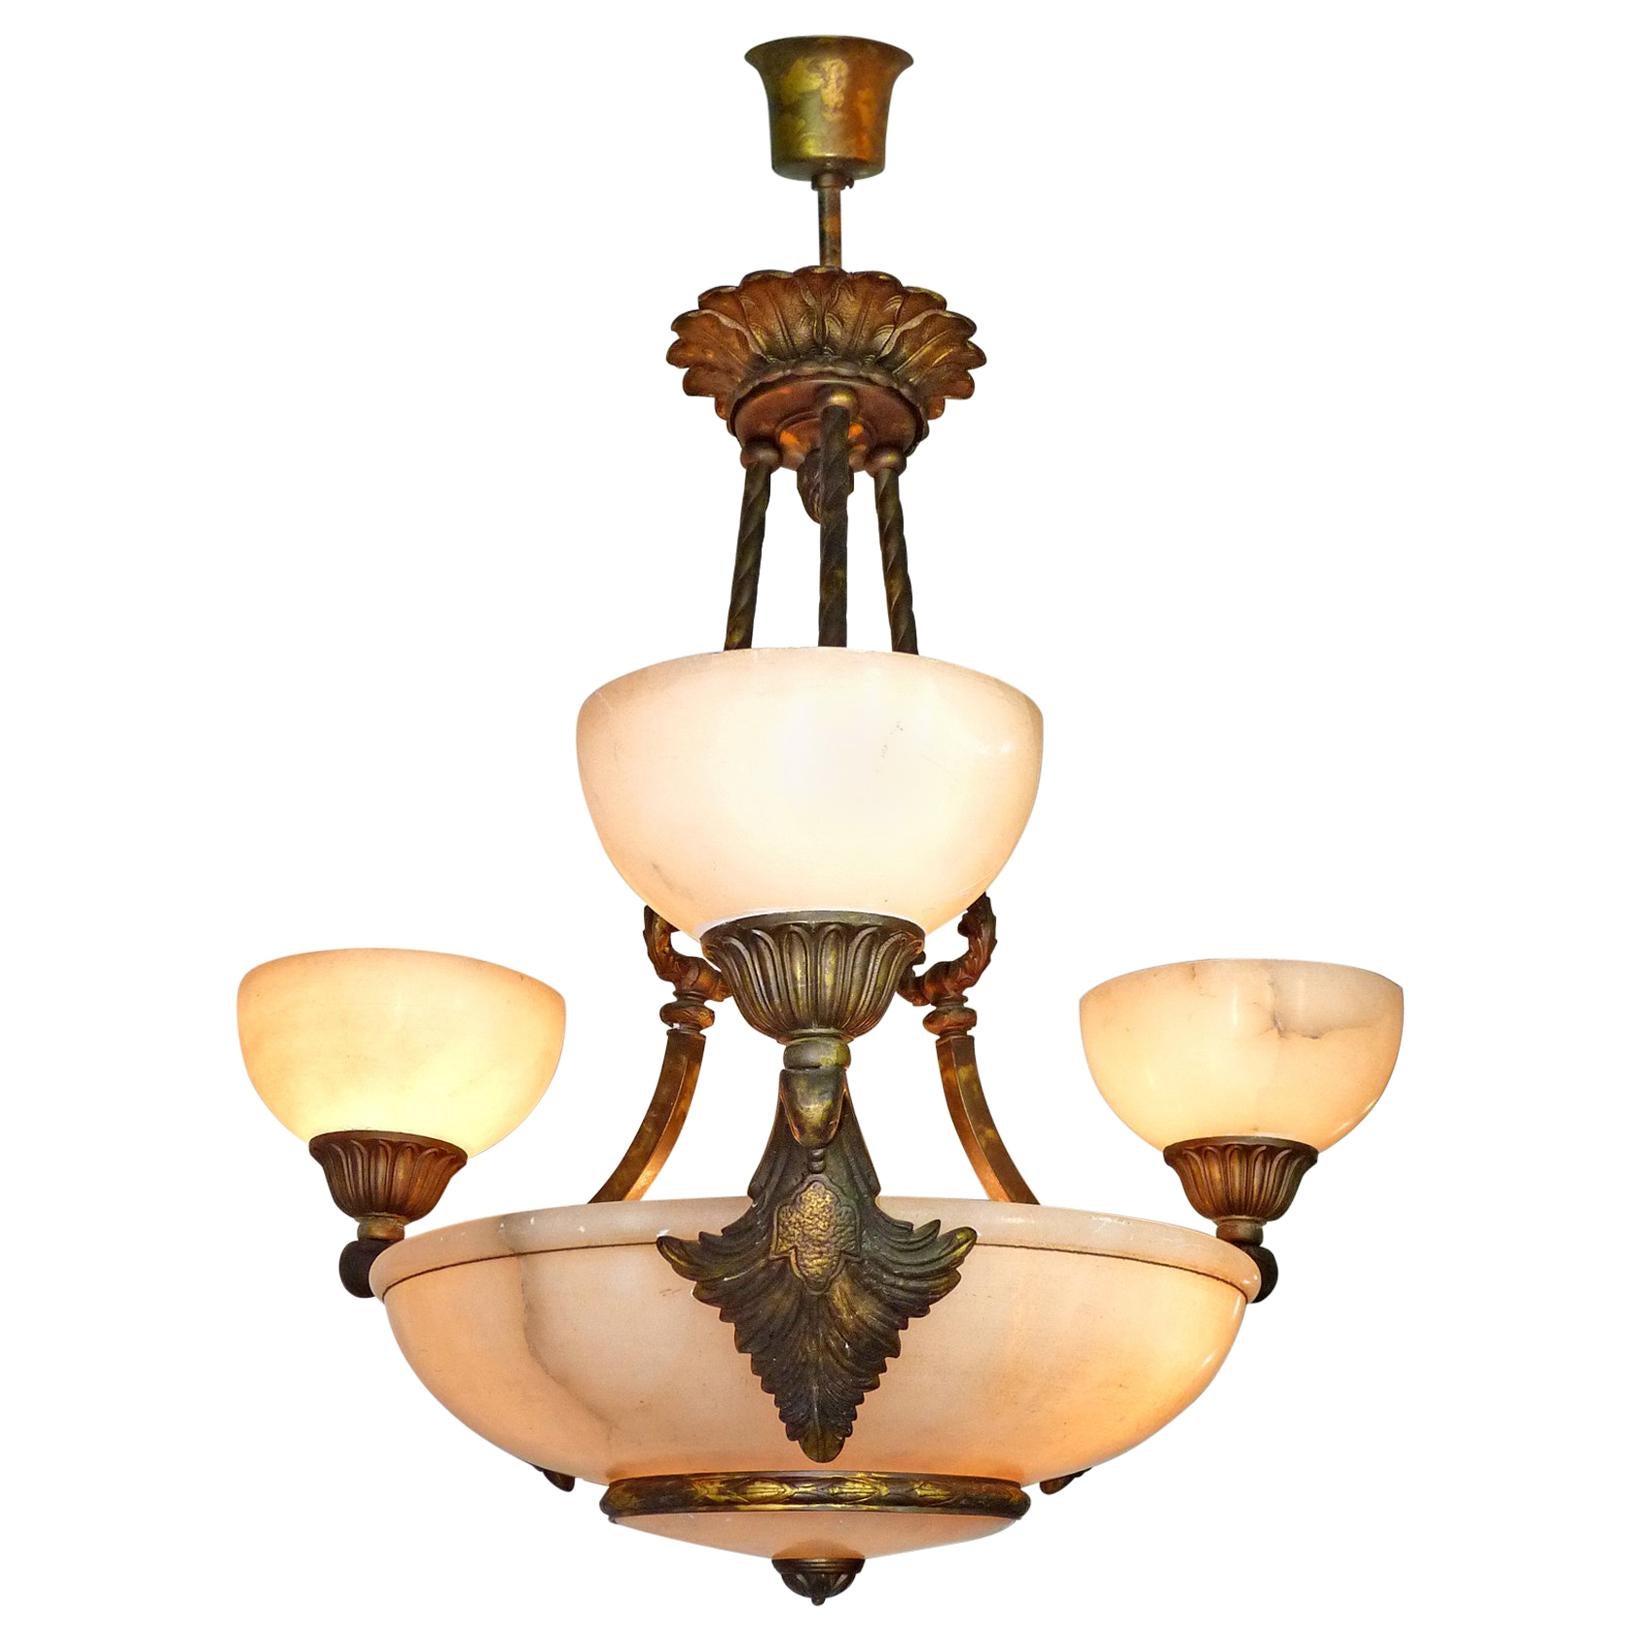 French Art Deco Art Nouveau neoclassical marble chandelier. Age patina
Six light bulbs (E14/60W)
Good working condition
Measures:
Diameter 27.5 in / 70 cm
Height 49.2 in (27.6 in + 21.6 in) / 125 cm (70cm + 55 cm)
Weight 36 lb. (16 kg).
Assembly